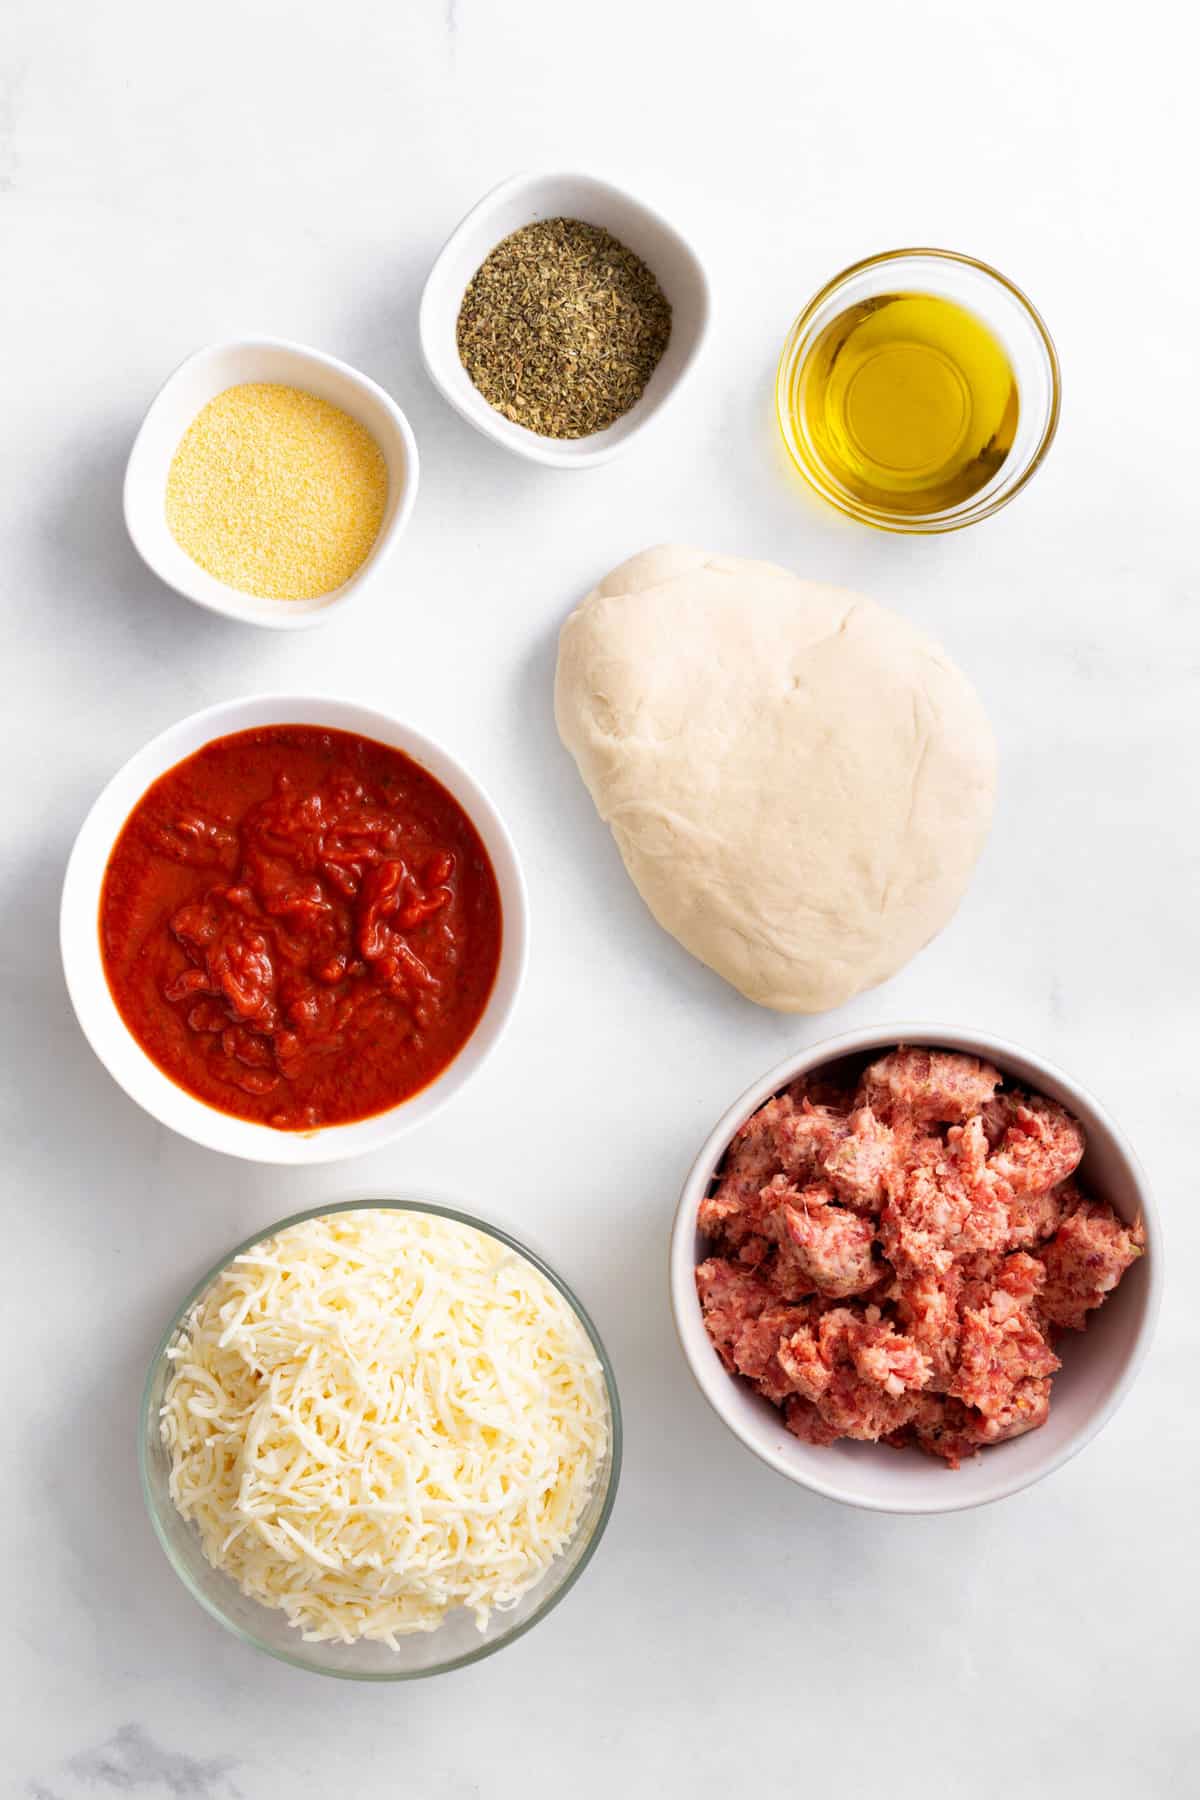 ingredients to make school pizza